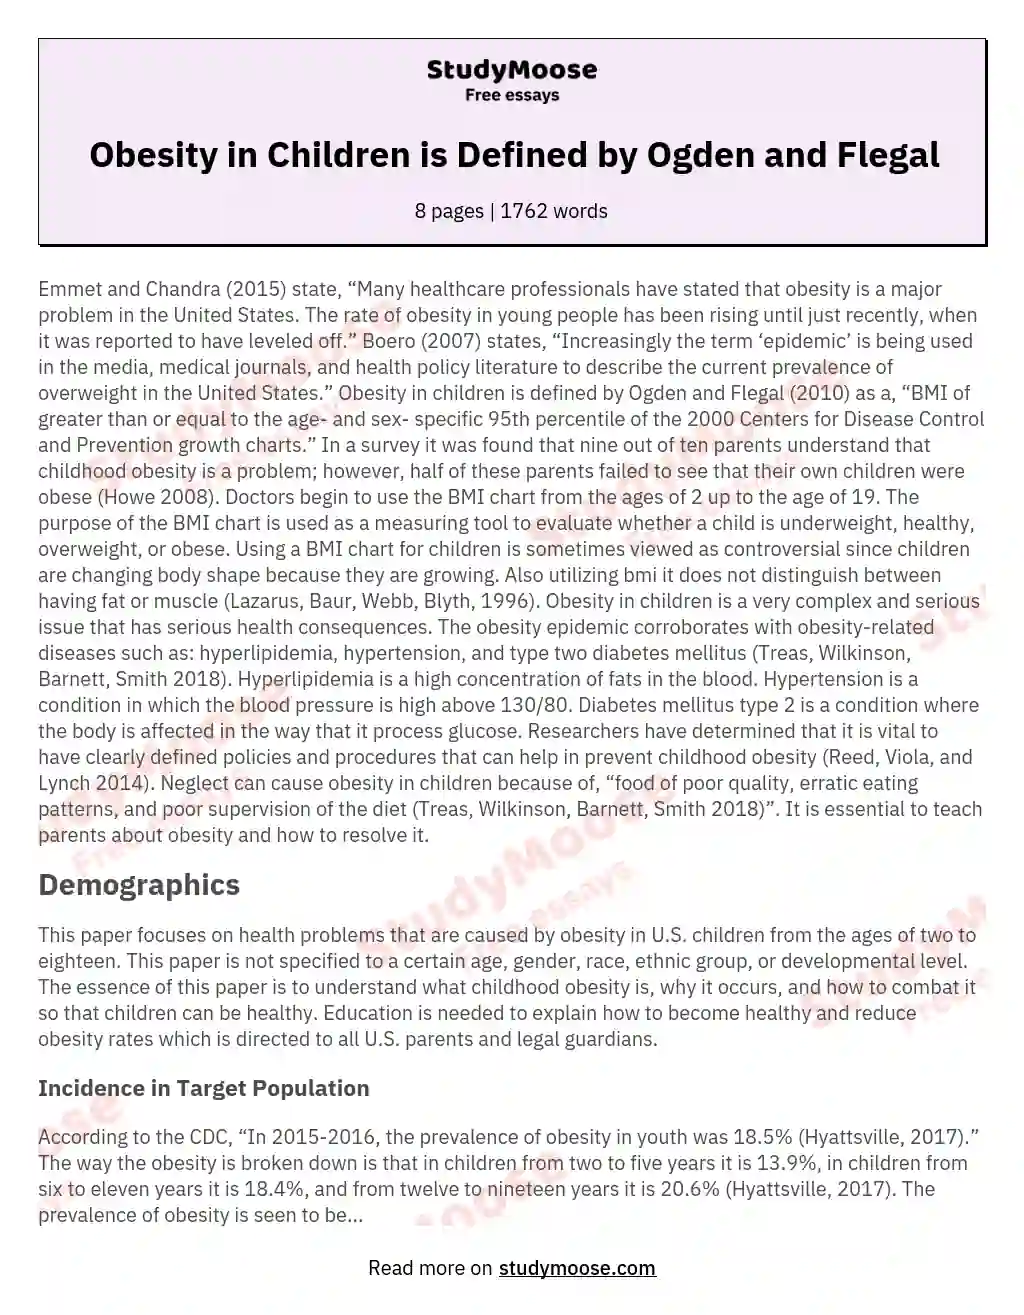 Obesity in Children is Defined by Ogden and Flegal essay